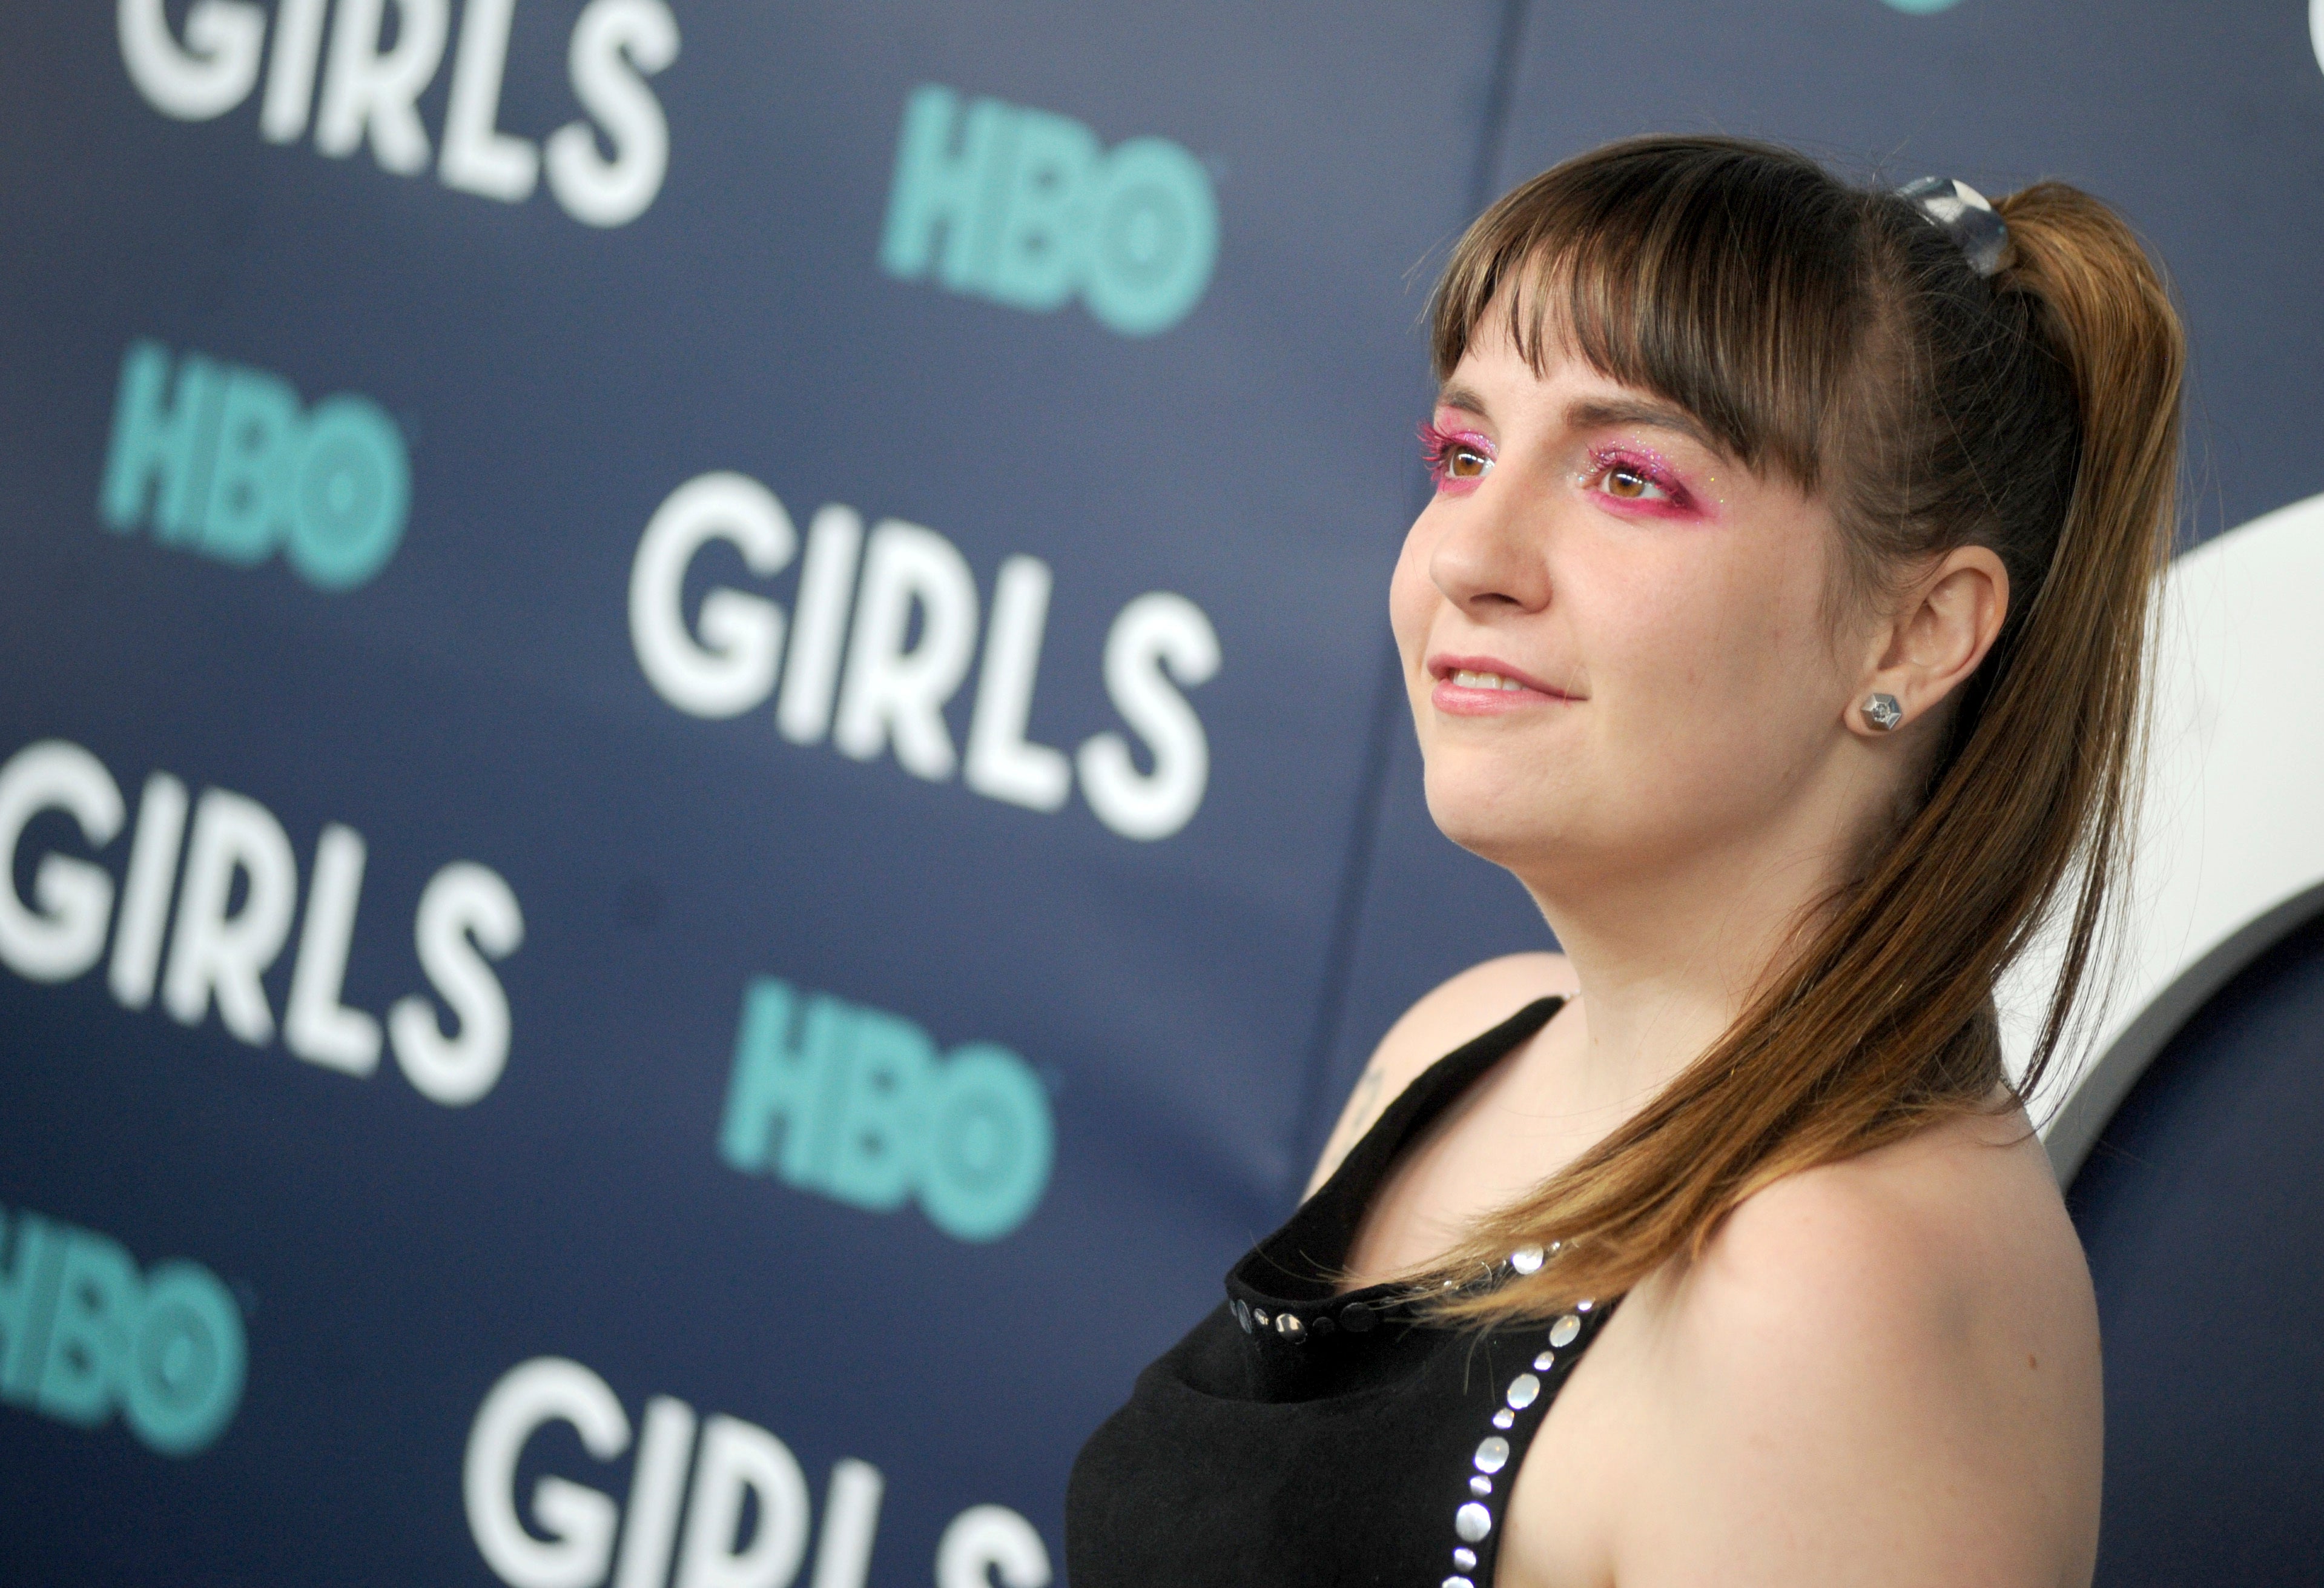 Lena Dunham's Response To Actress Aurora Perrineau's Rape Claim Is A Perfect Example Of White Feminism At Play